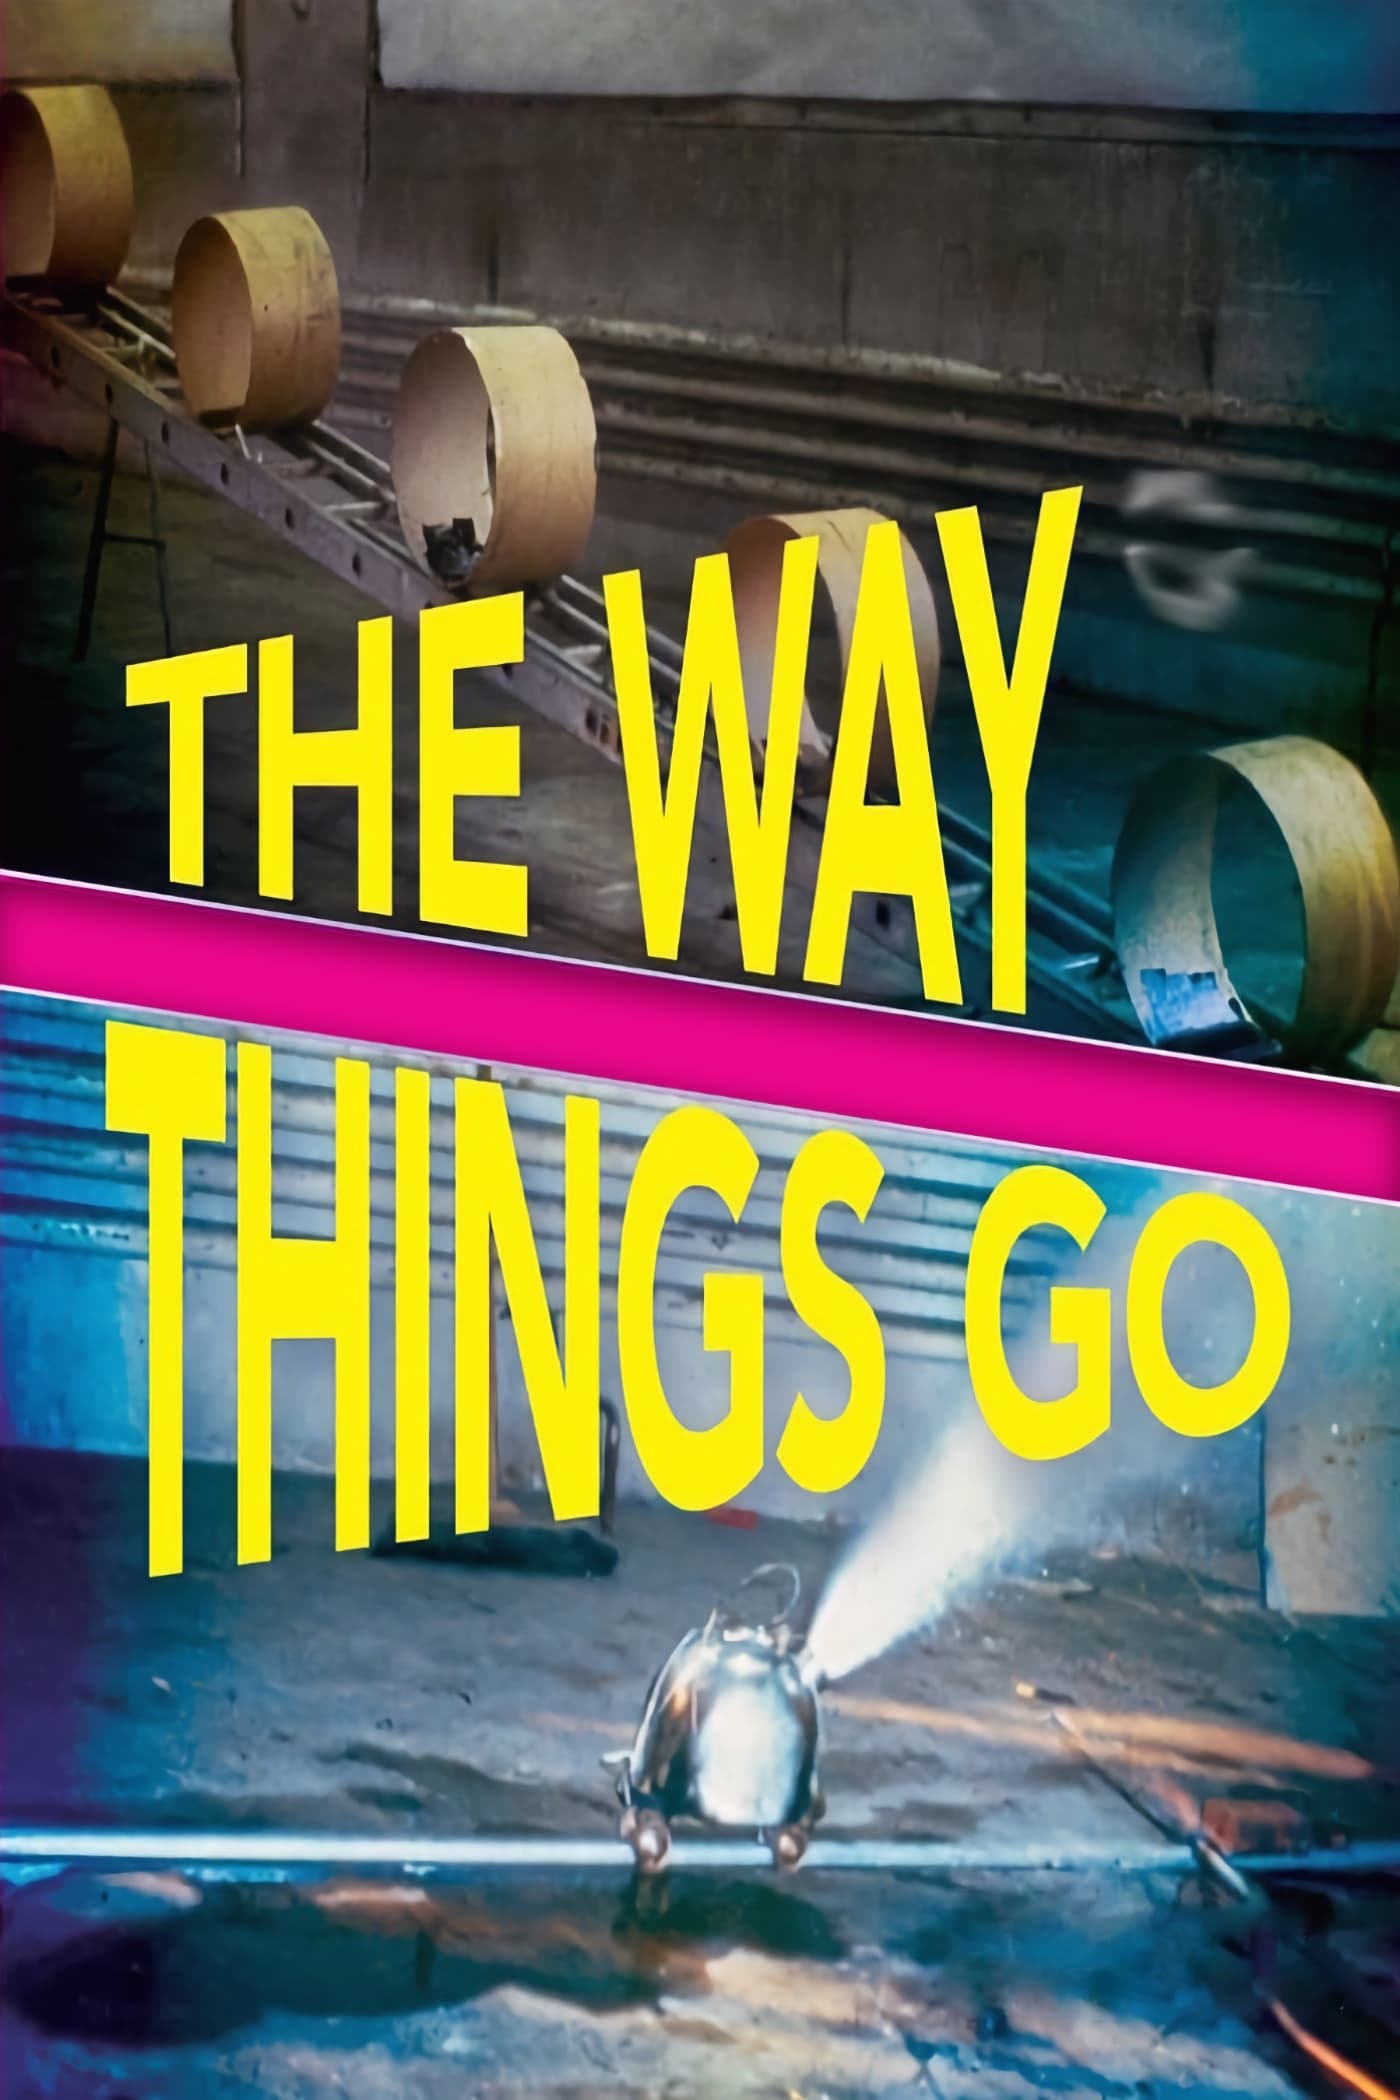 The Way Things Go